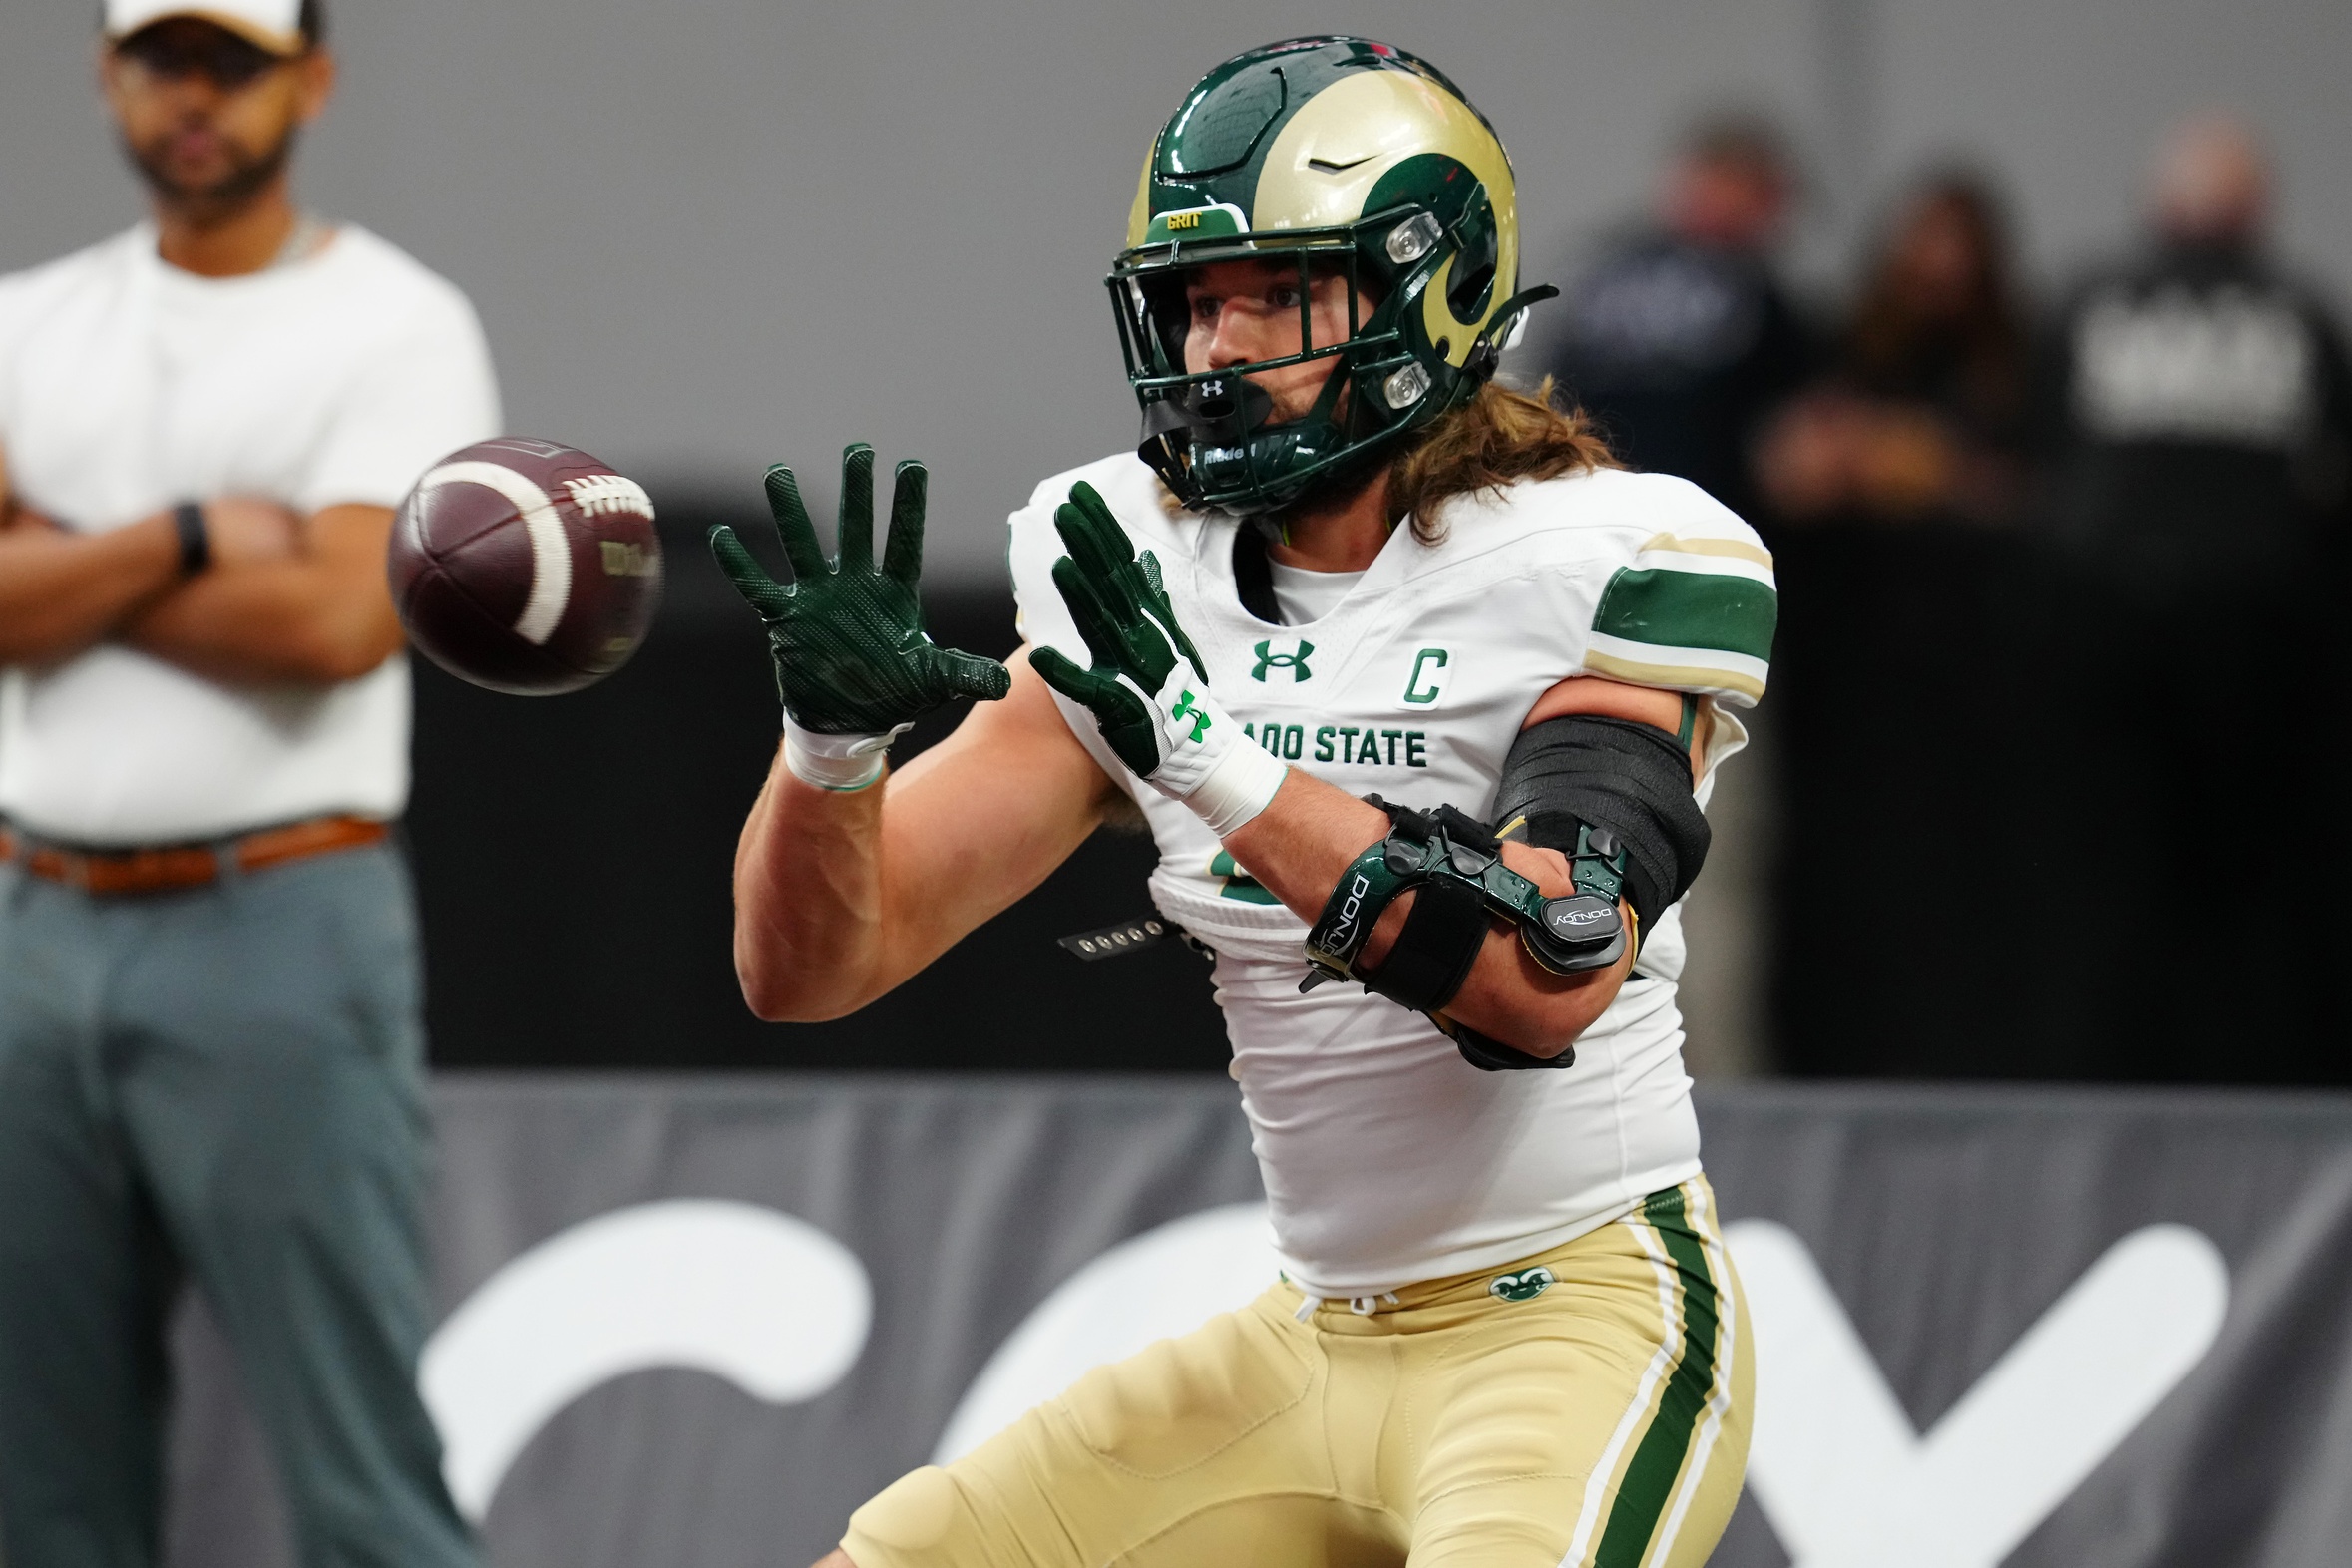 Colorado State Rams tight end Dallin Holker (5) warms up before a game against the UNLV Rebels at Allegiant Stadium. Mandatory Credit: Stephen R. Sylvanie-USA TODAY Sports